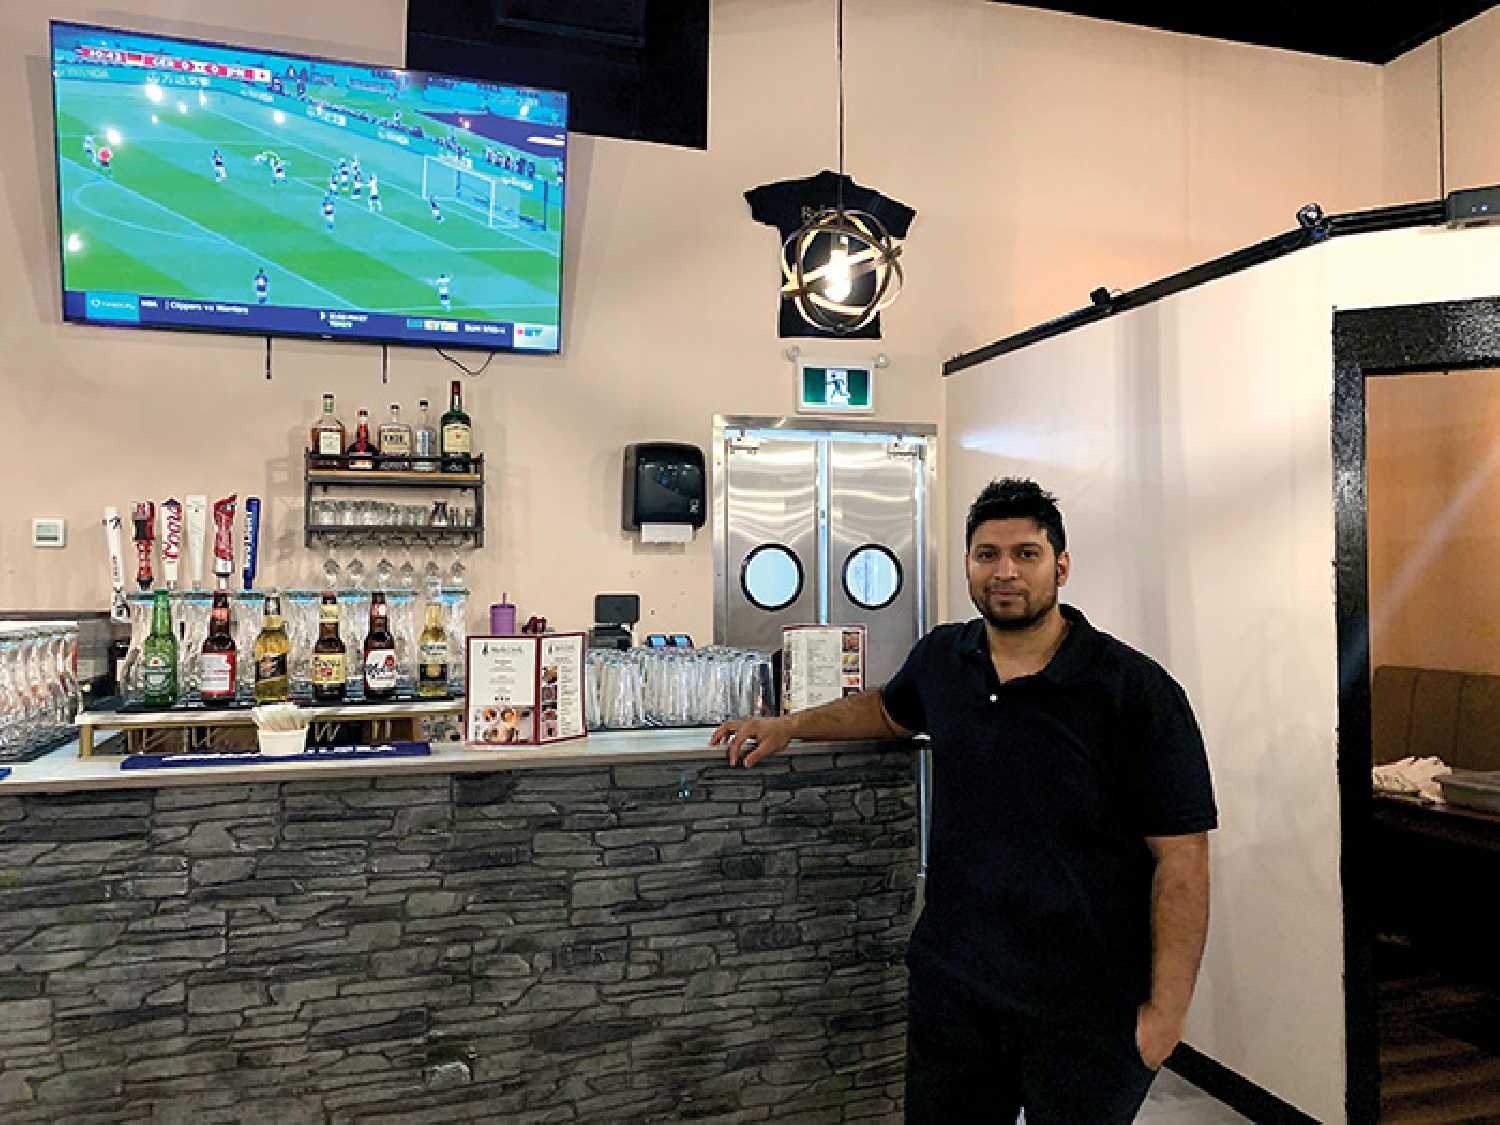 The franchise restaurant Rock Creek Tap and Grill has opened a new location in Esterhazy. Owner and chef Apoorav Joshi of the restaurant in Esterhazy, said he looks forward to offering a new space for people to come and eat in the community. 